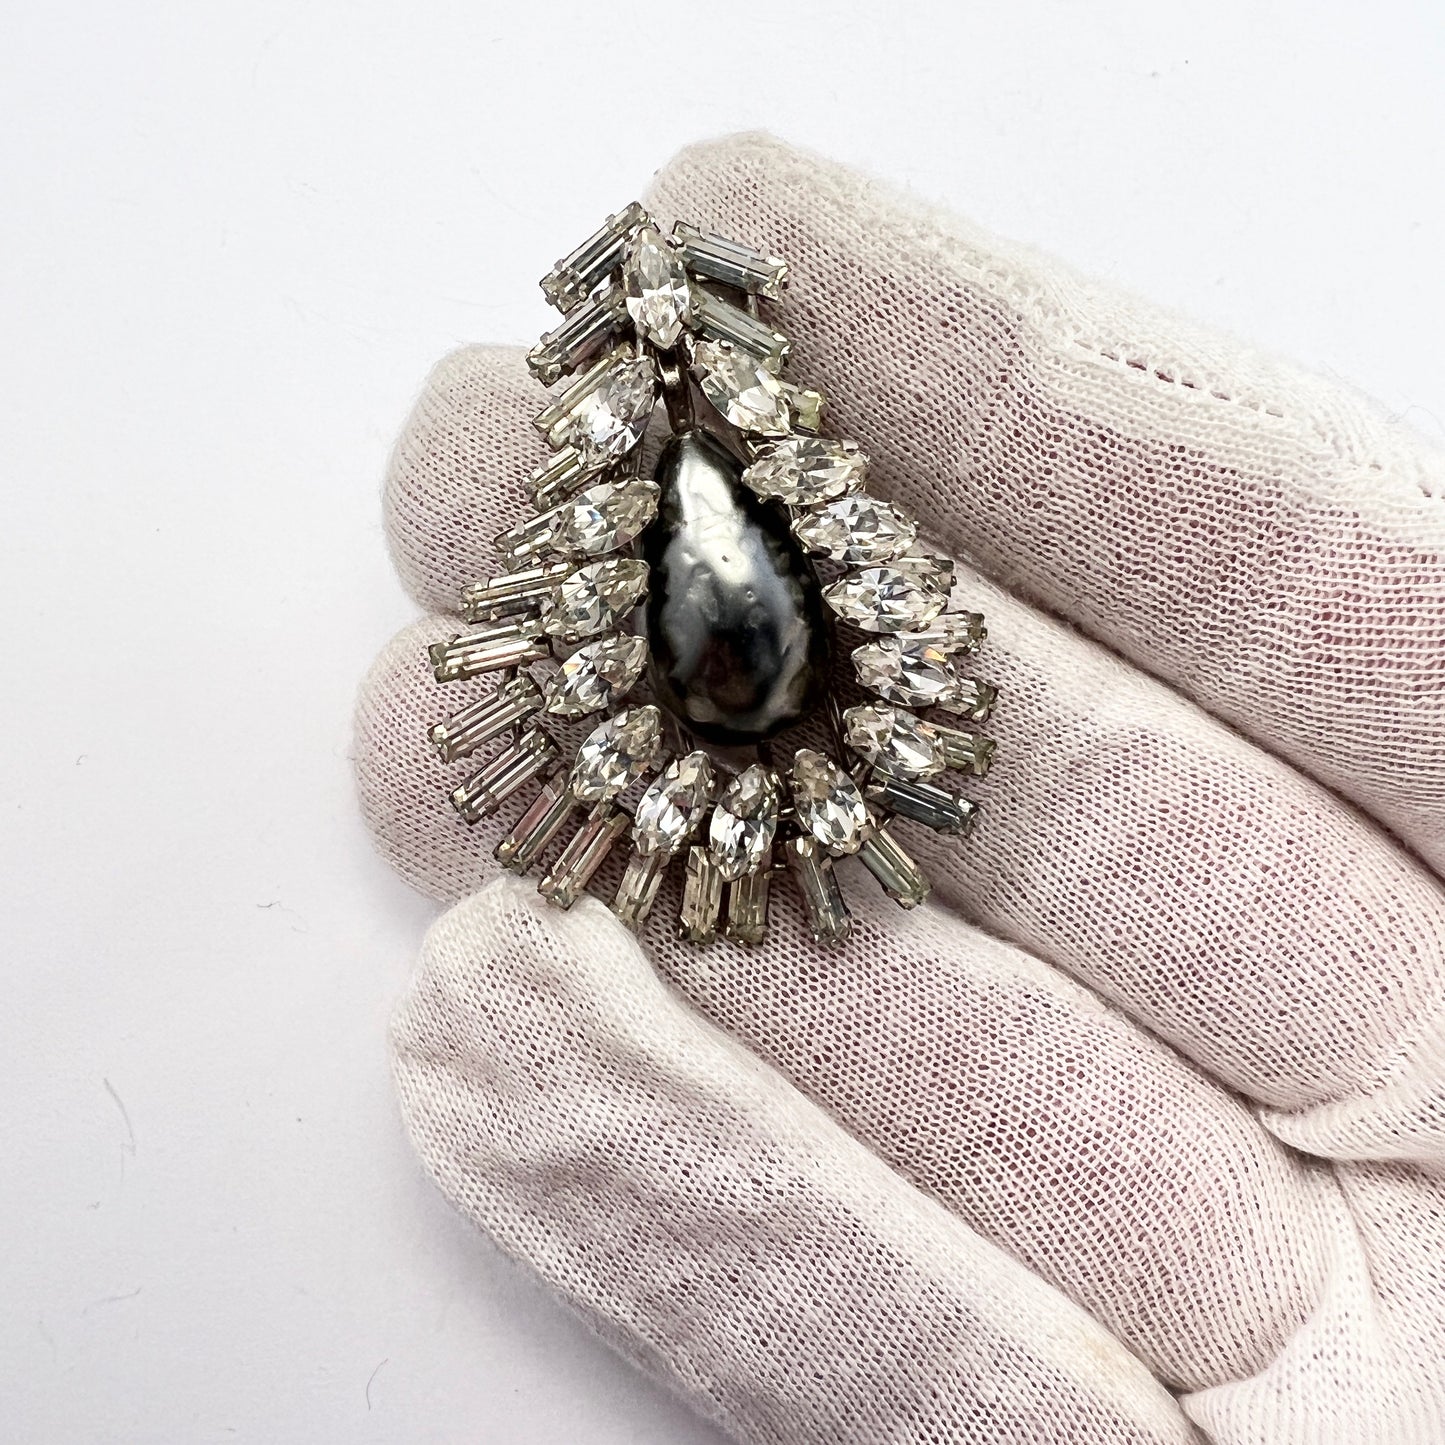 France c 1930s Signed Depose and Made in France Vintage Costume Jewelry Fur Clip Brooch.